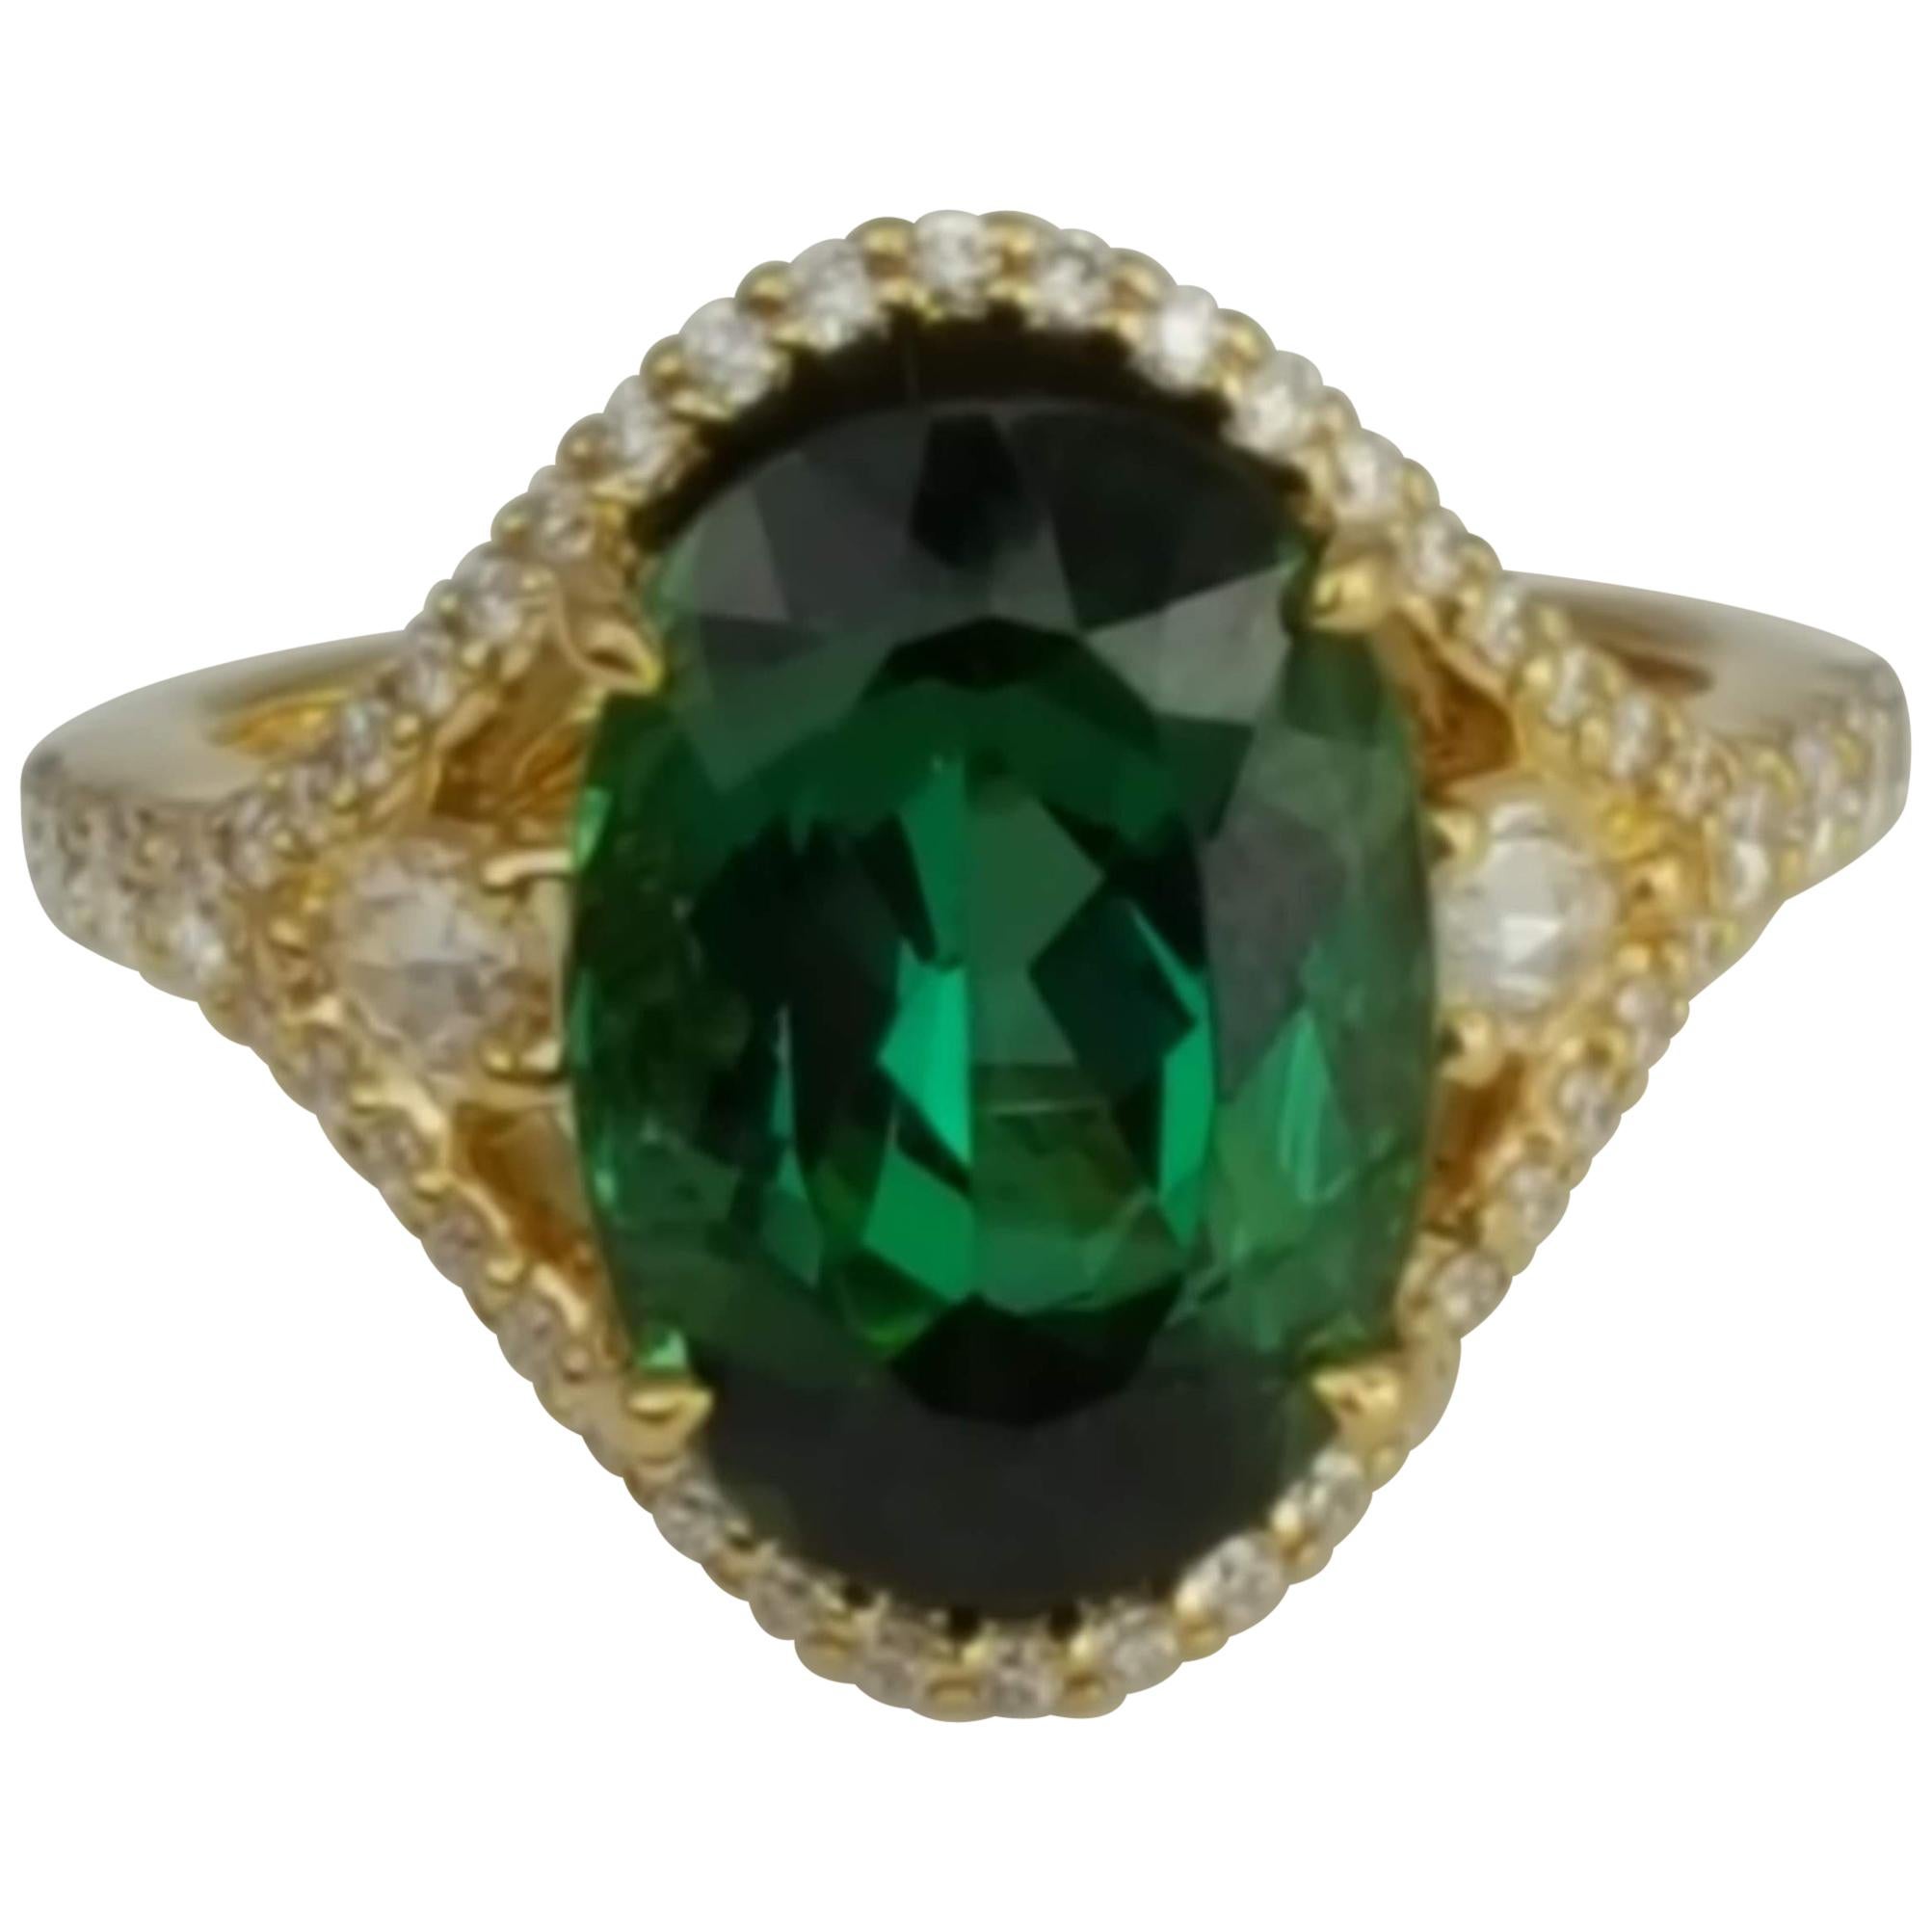 (DiamondTown) With a 6.41 carat exotic Green Tourmaline center, embellished by 0.63 carats round and pear shape diamonds, this ring has a simple elegance suited for every occasion.

Center: 6.41 Carat Green Tourmaline.
Two pear shape diamonds total